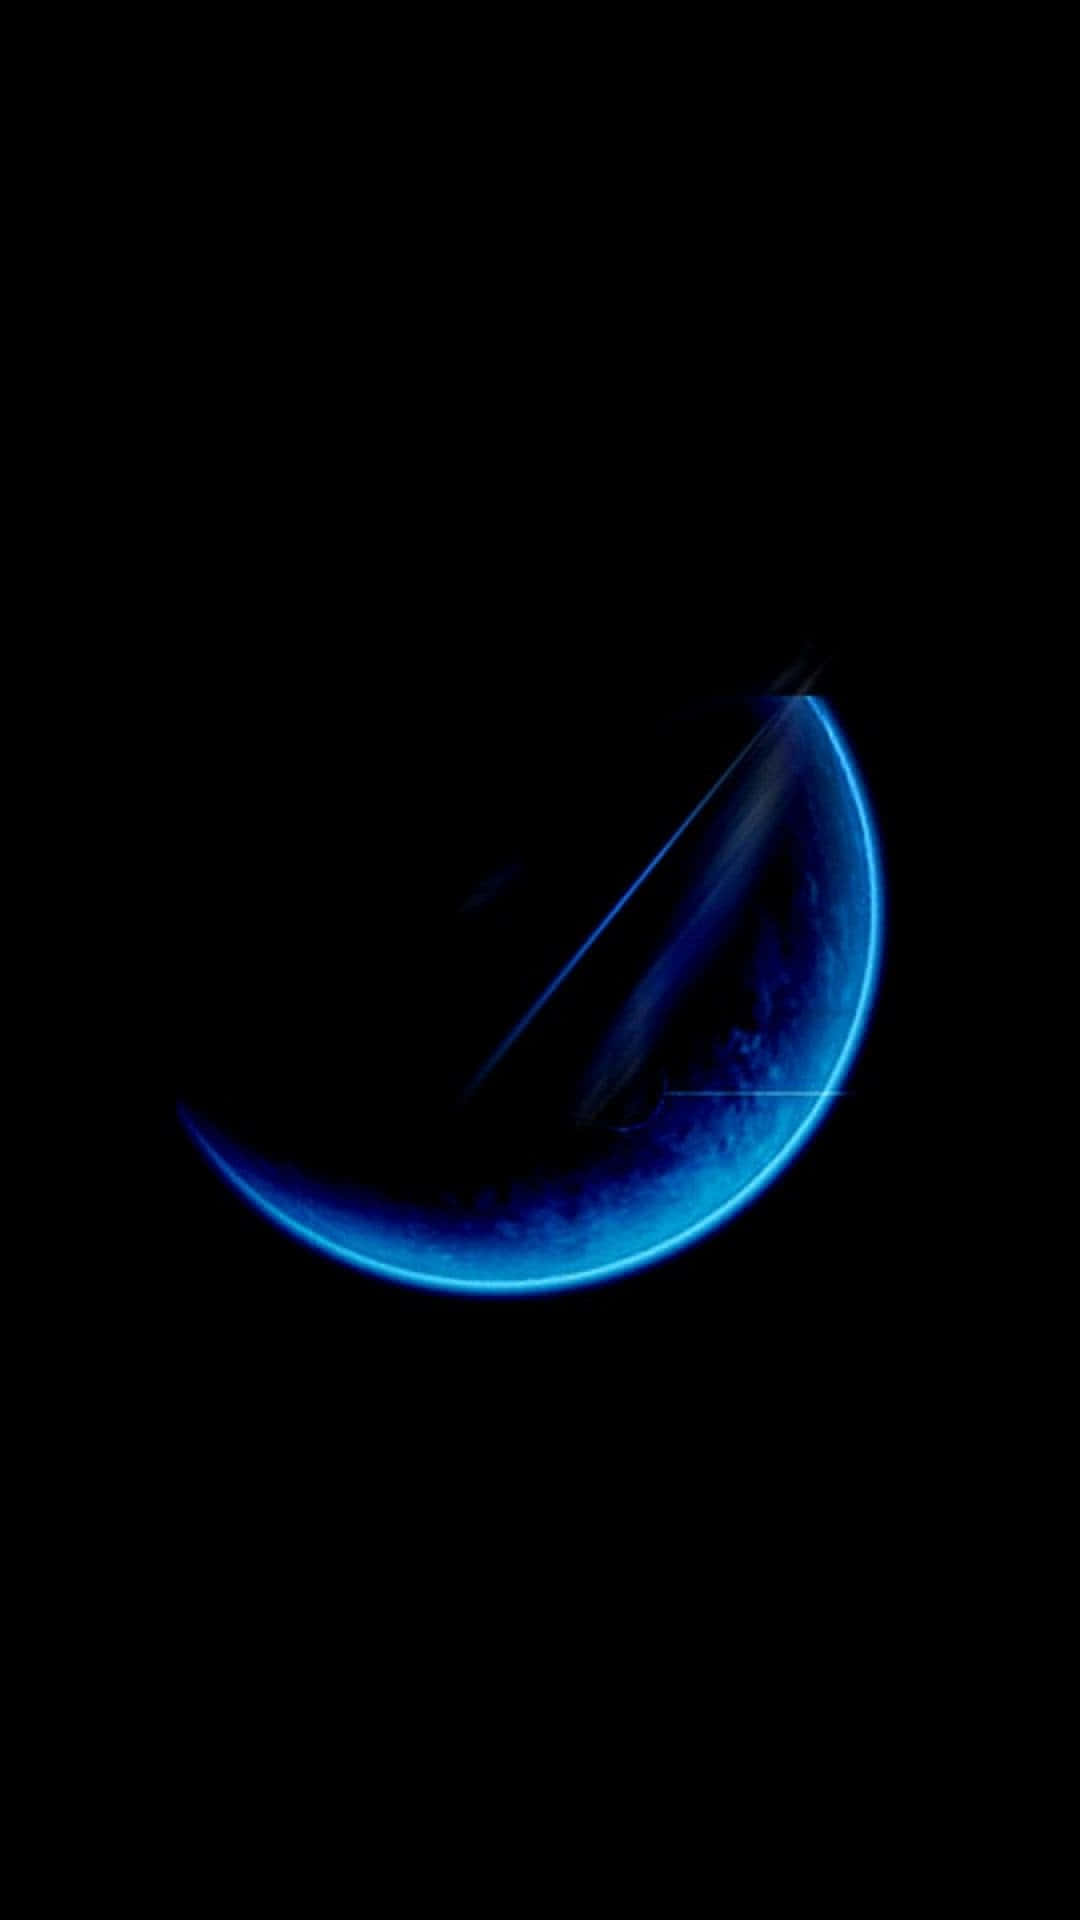 A Blue Circle On A Black Background Wallpaper